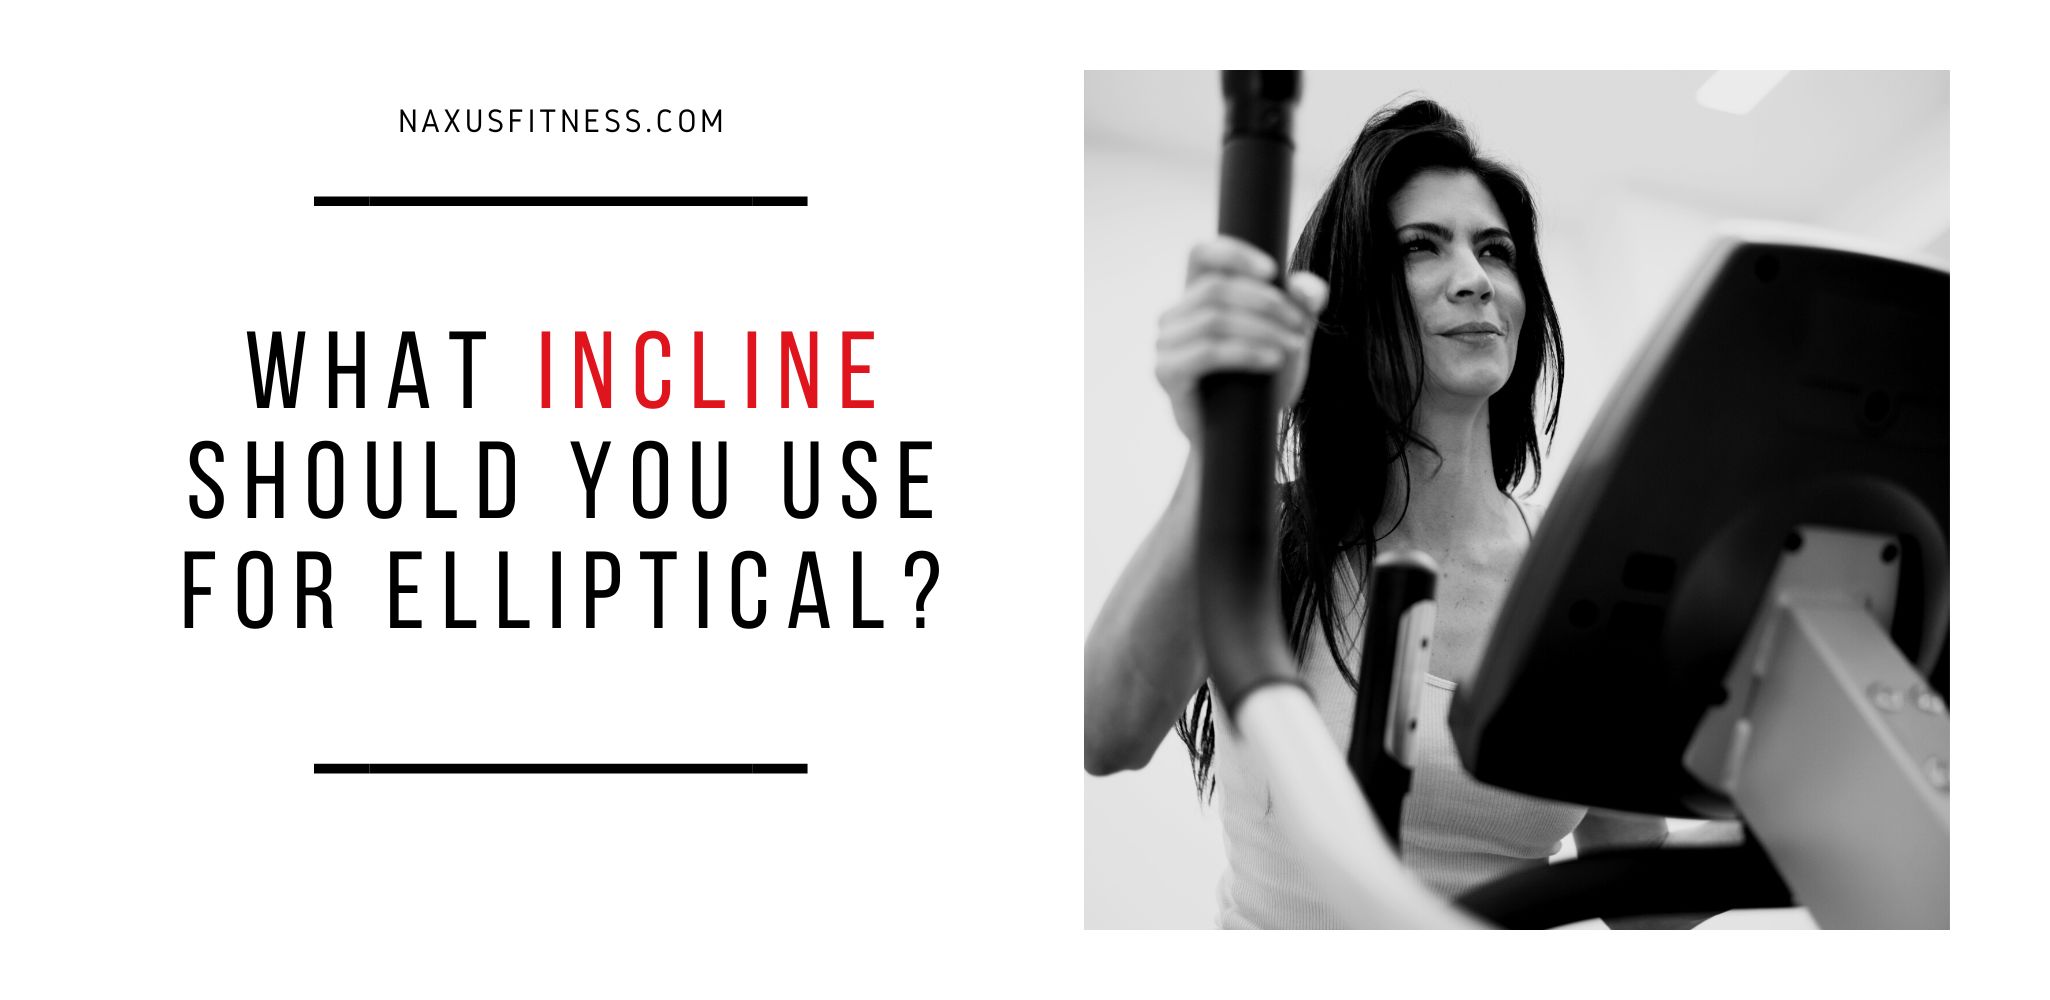 What incline should you use for elliptical?